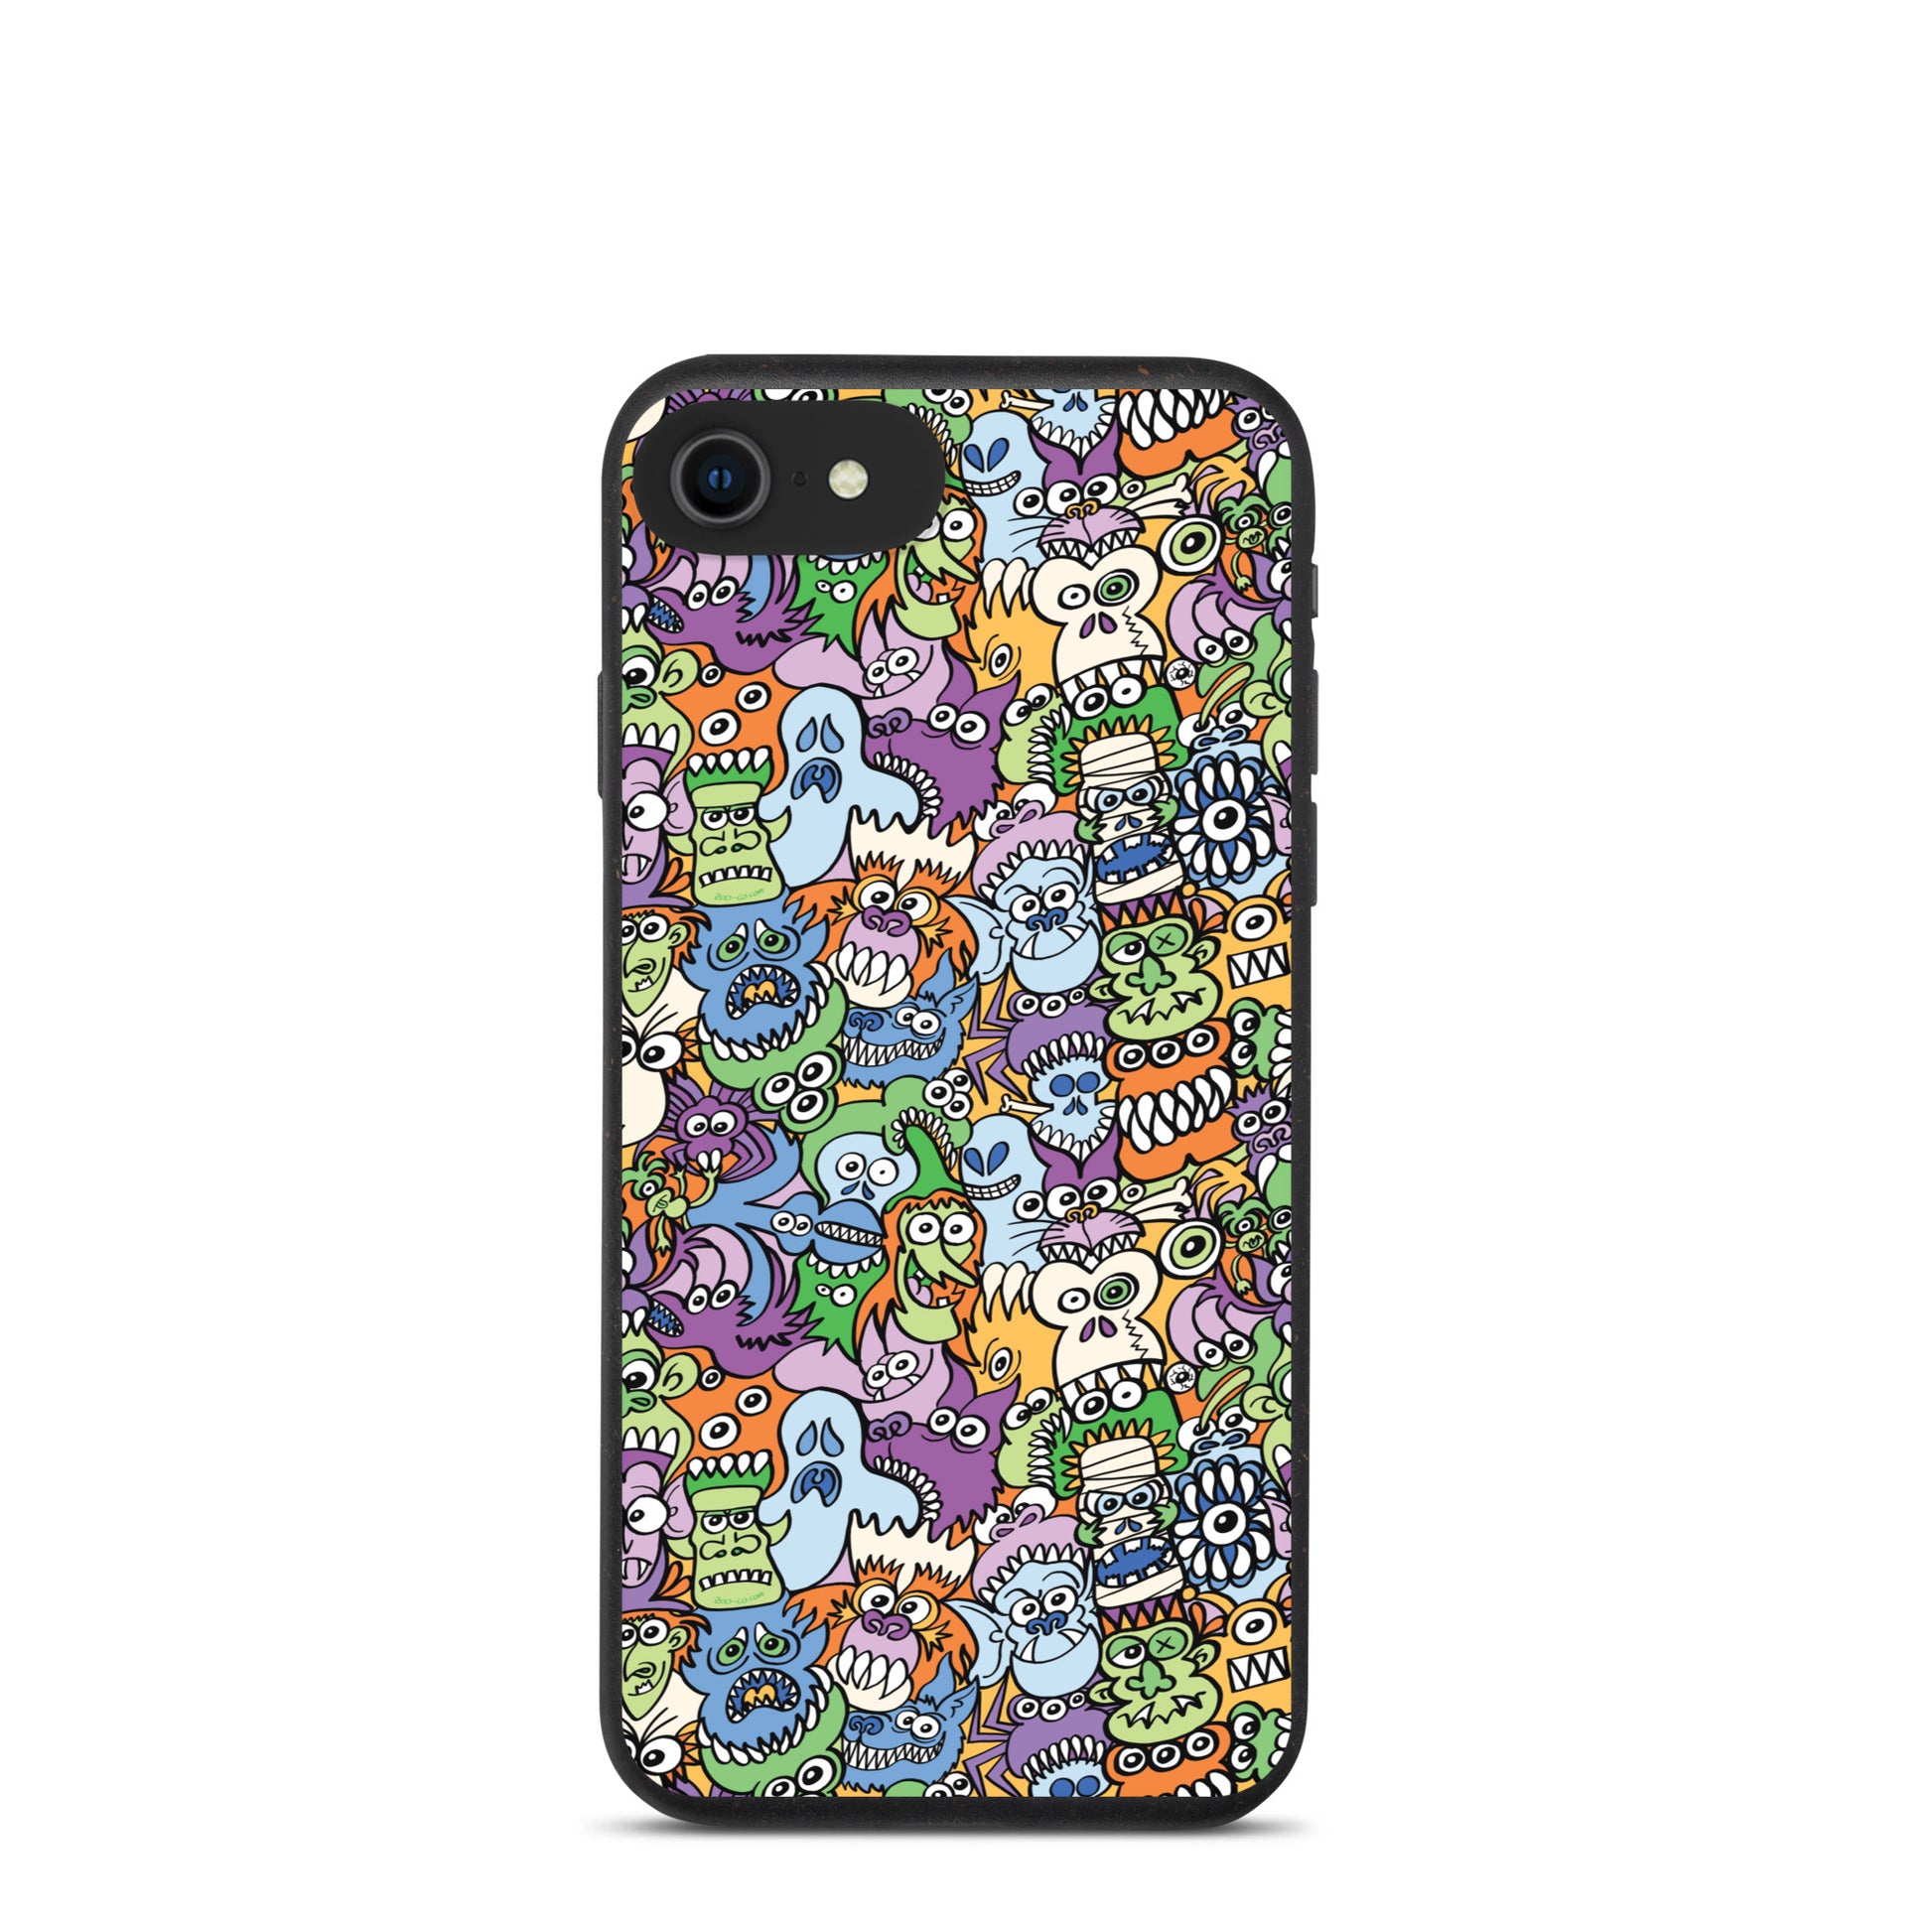 All the spooky Halloween monsters in a pattern design Speckled iPhone case. iphone 7 se. iphone 8 se